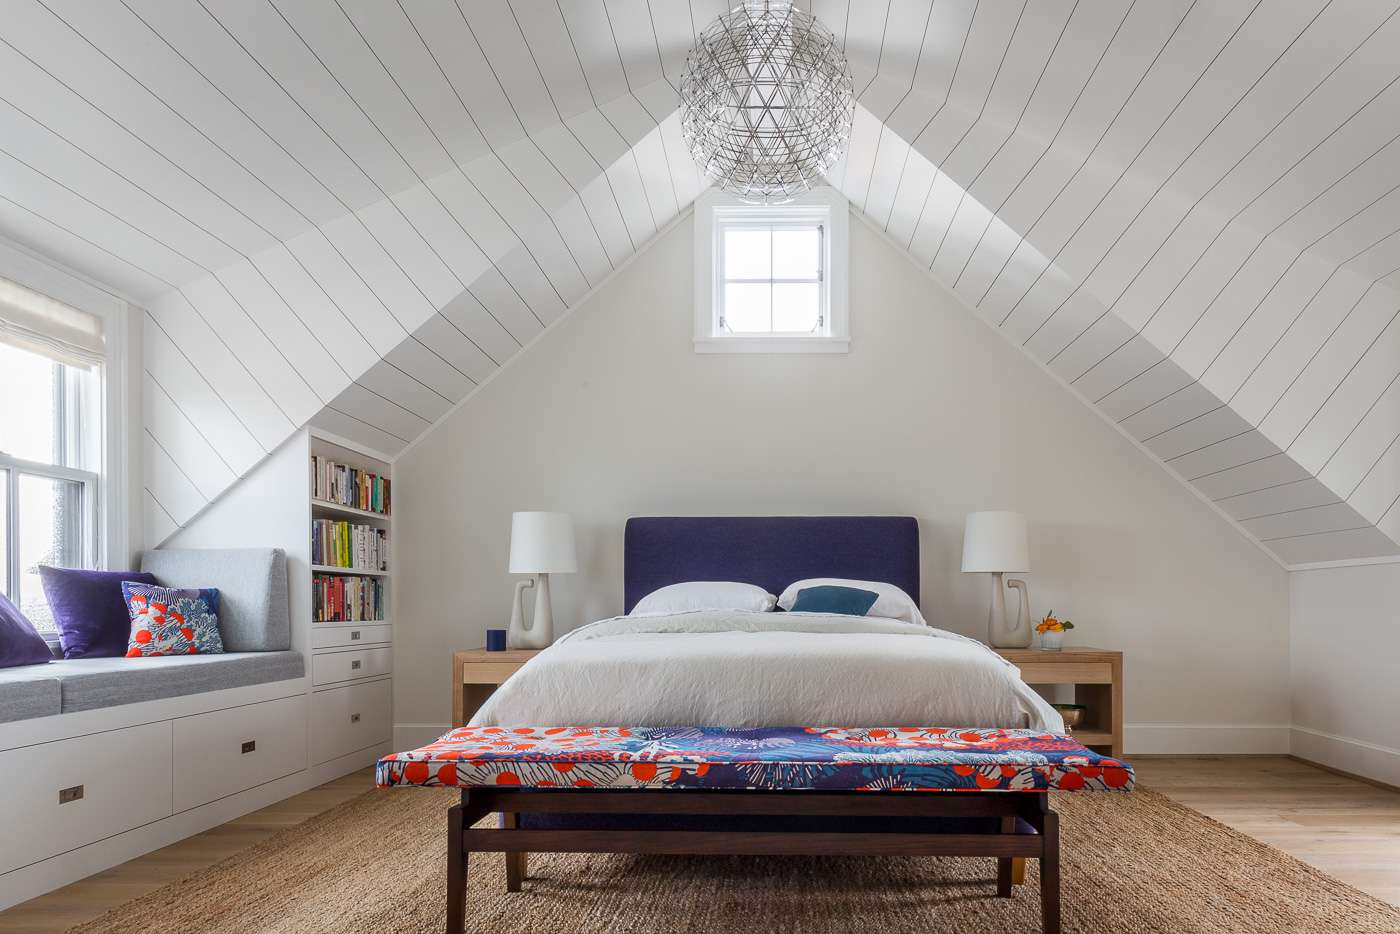 18 Attic Room Ideas That’ll Make the Most of This Bonus Space [Video]